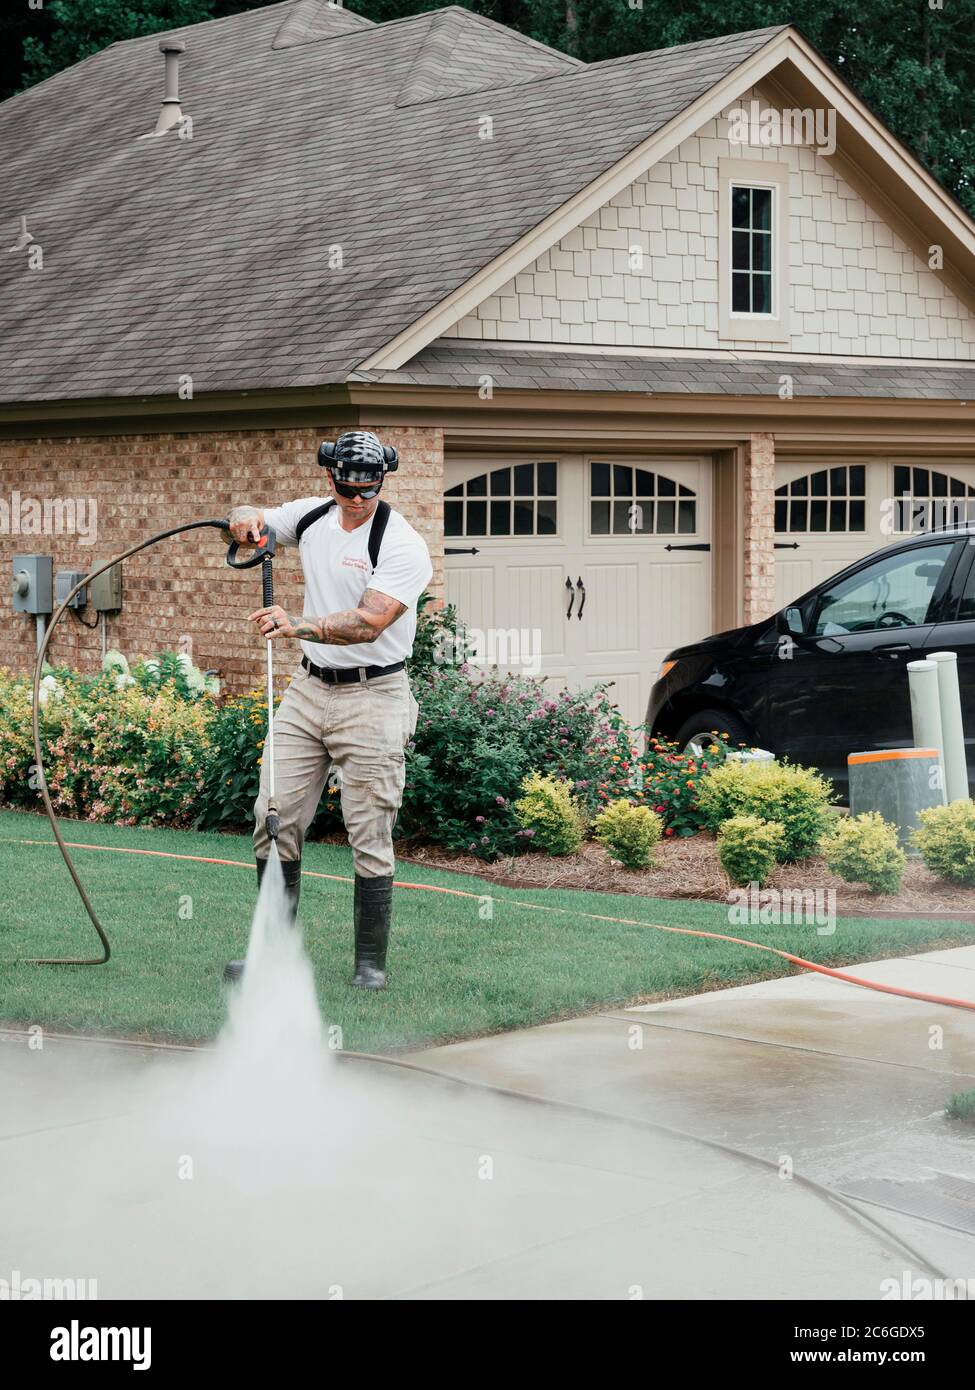 Man pressure washing or power washing or cleaning a concrete driveway and sidewalk in Montgomery Alabama, USA. Stock Photo